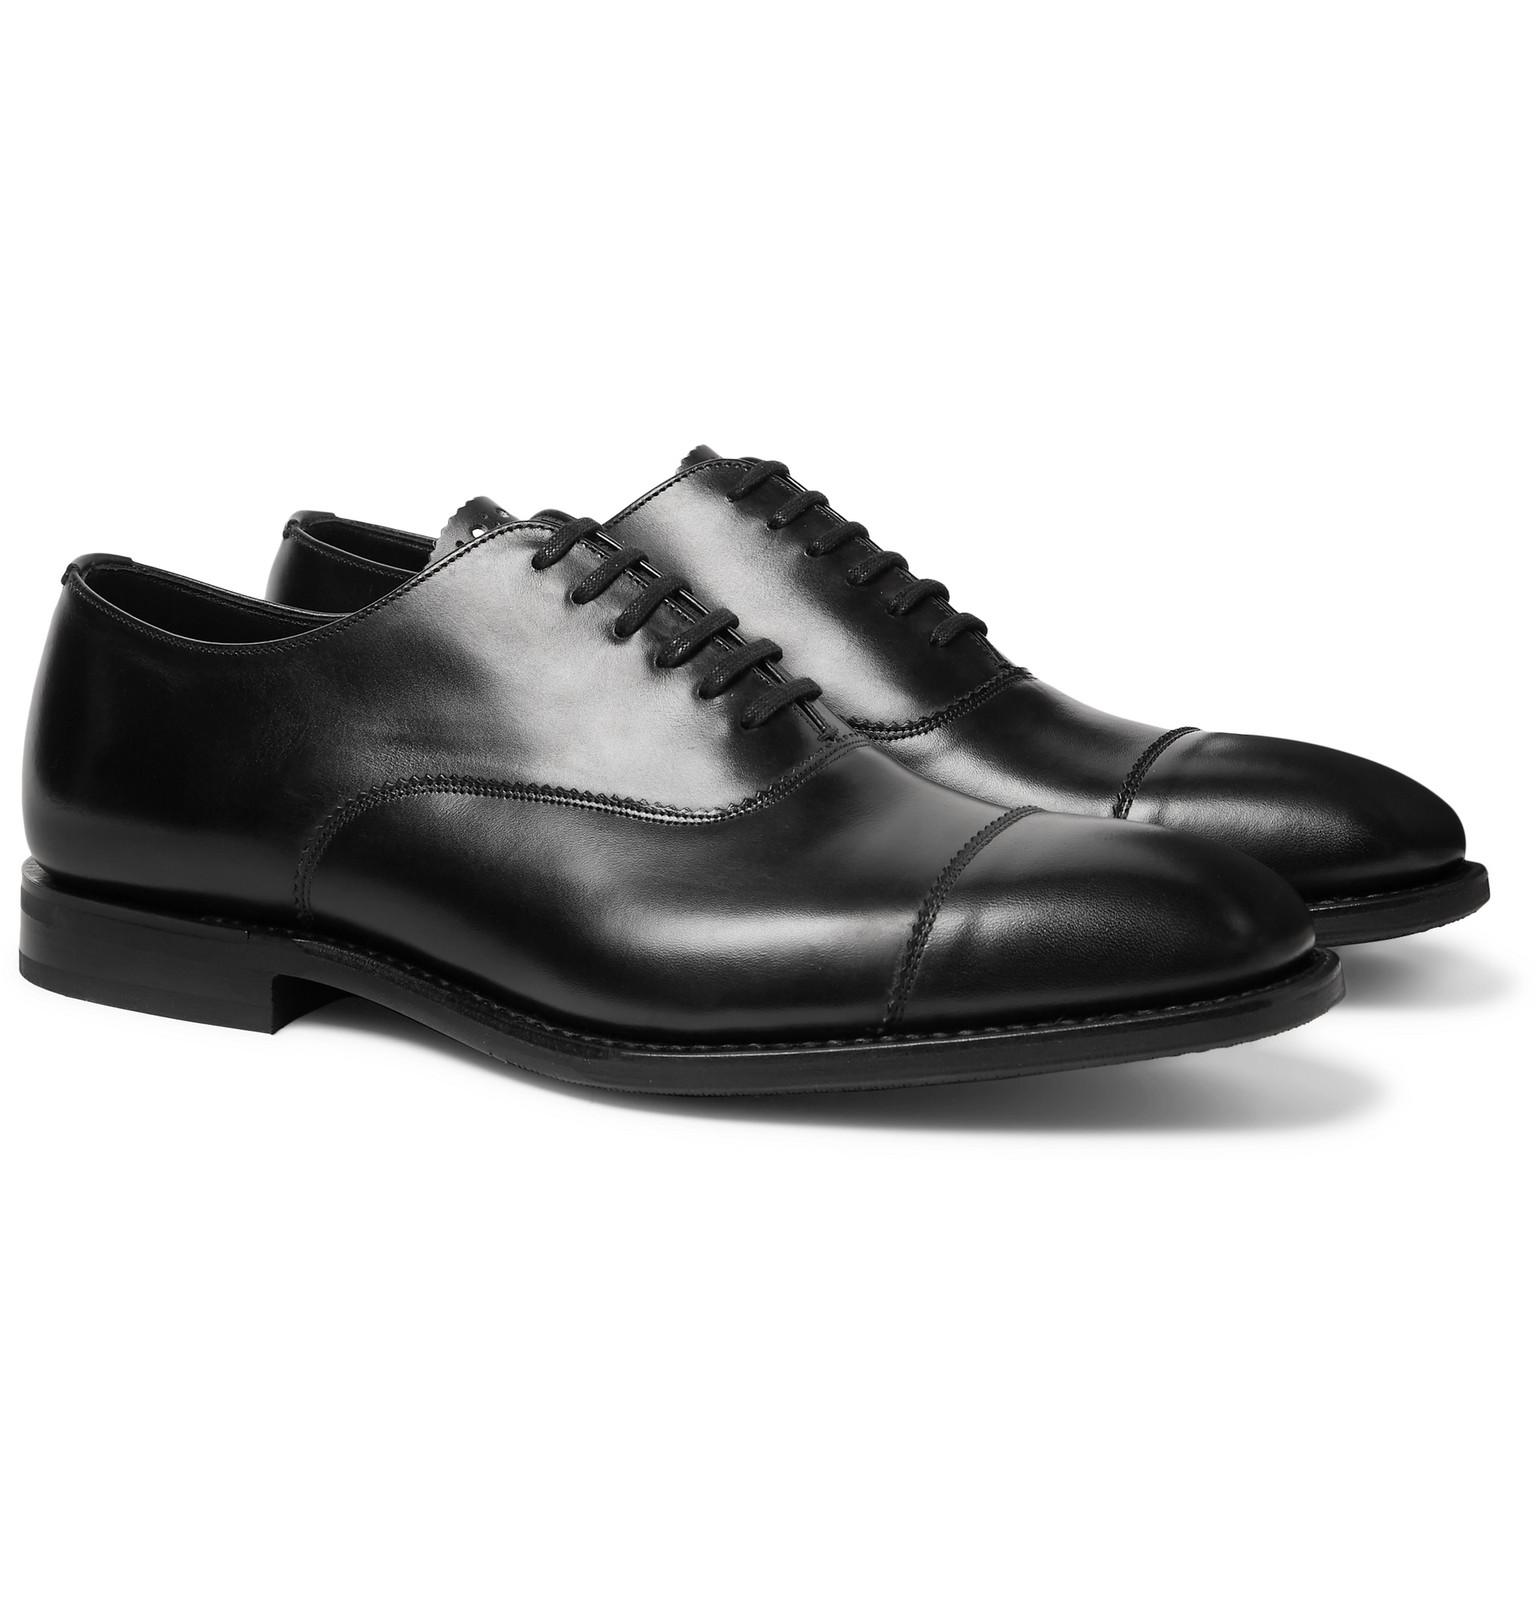 Church's Dubai Polished-leather Oxford Shoes in Black for Men - Lyst